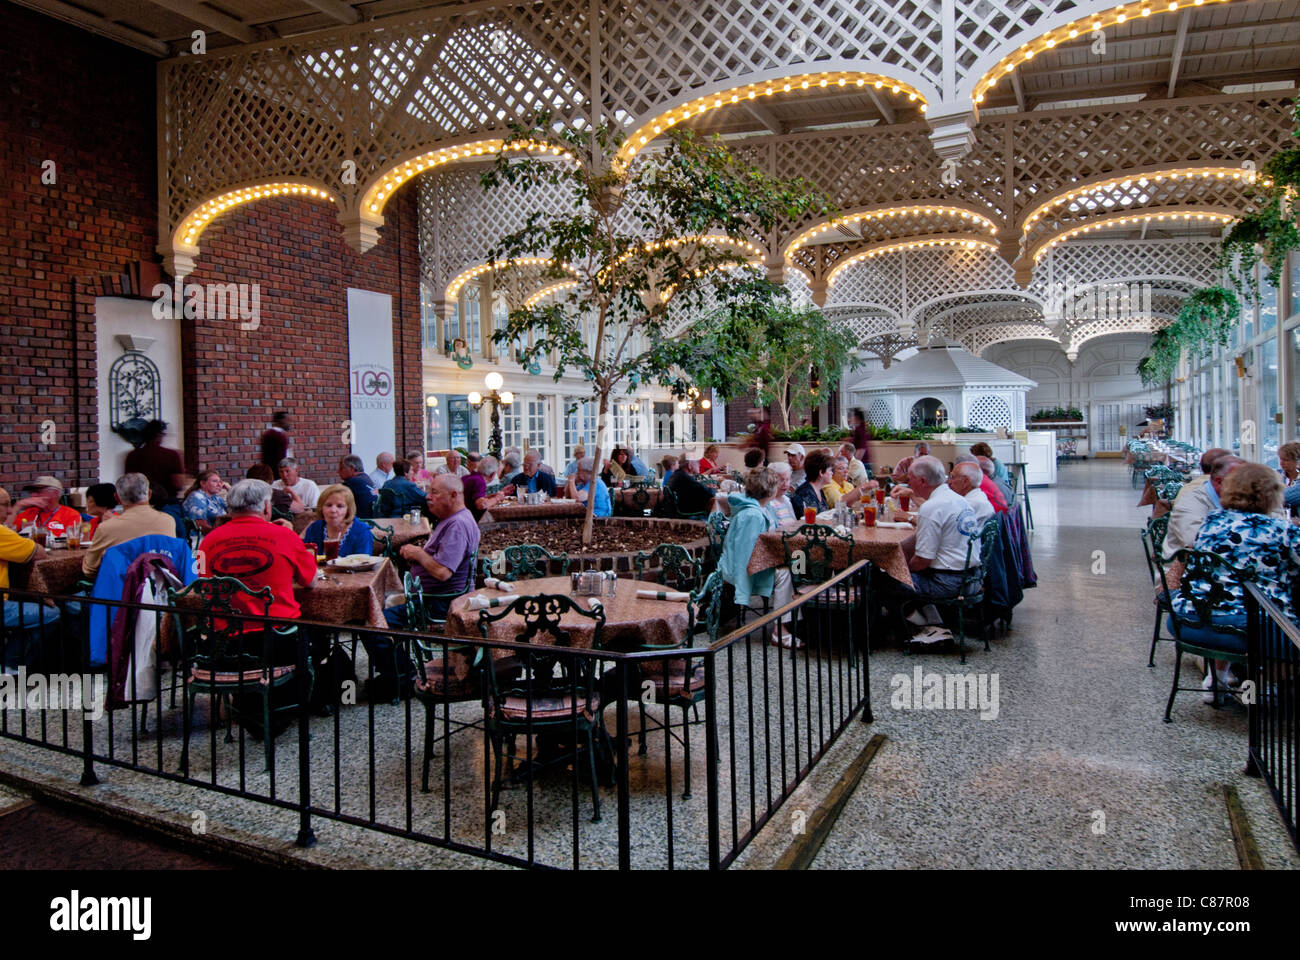 Restaurant in Chattanooga Choo Choo Historic Hotel, formerly Terminal Station built in 1908, Chattanooga, Tennessee, USA Stock Photo